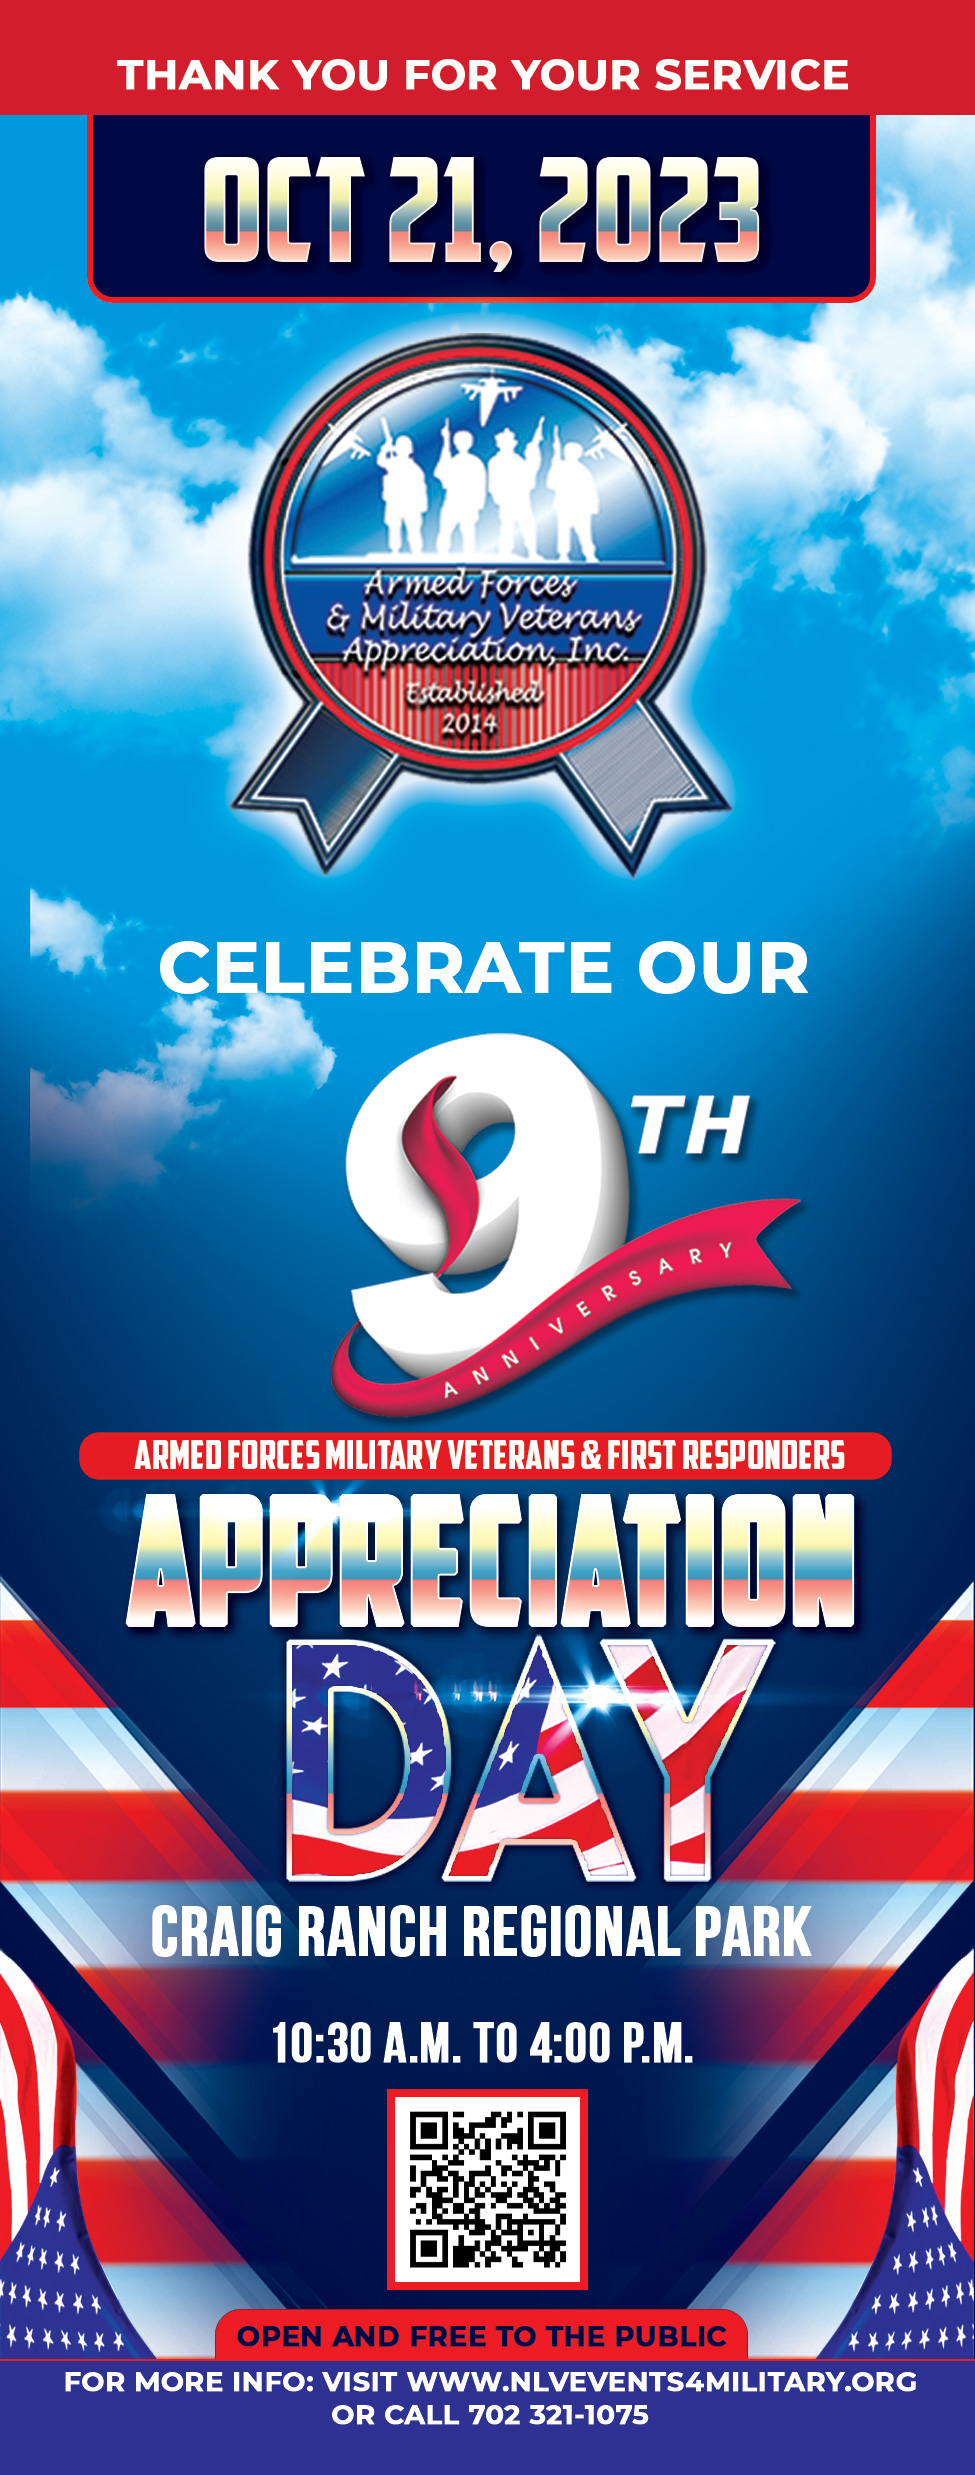 9th Anniversary Armed Forces Military Veterans & First Responders Appreciation Day flyer